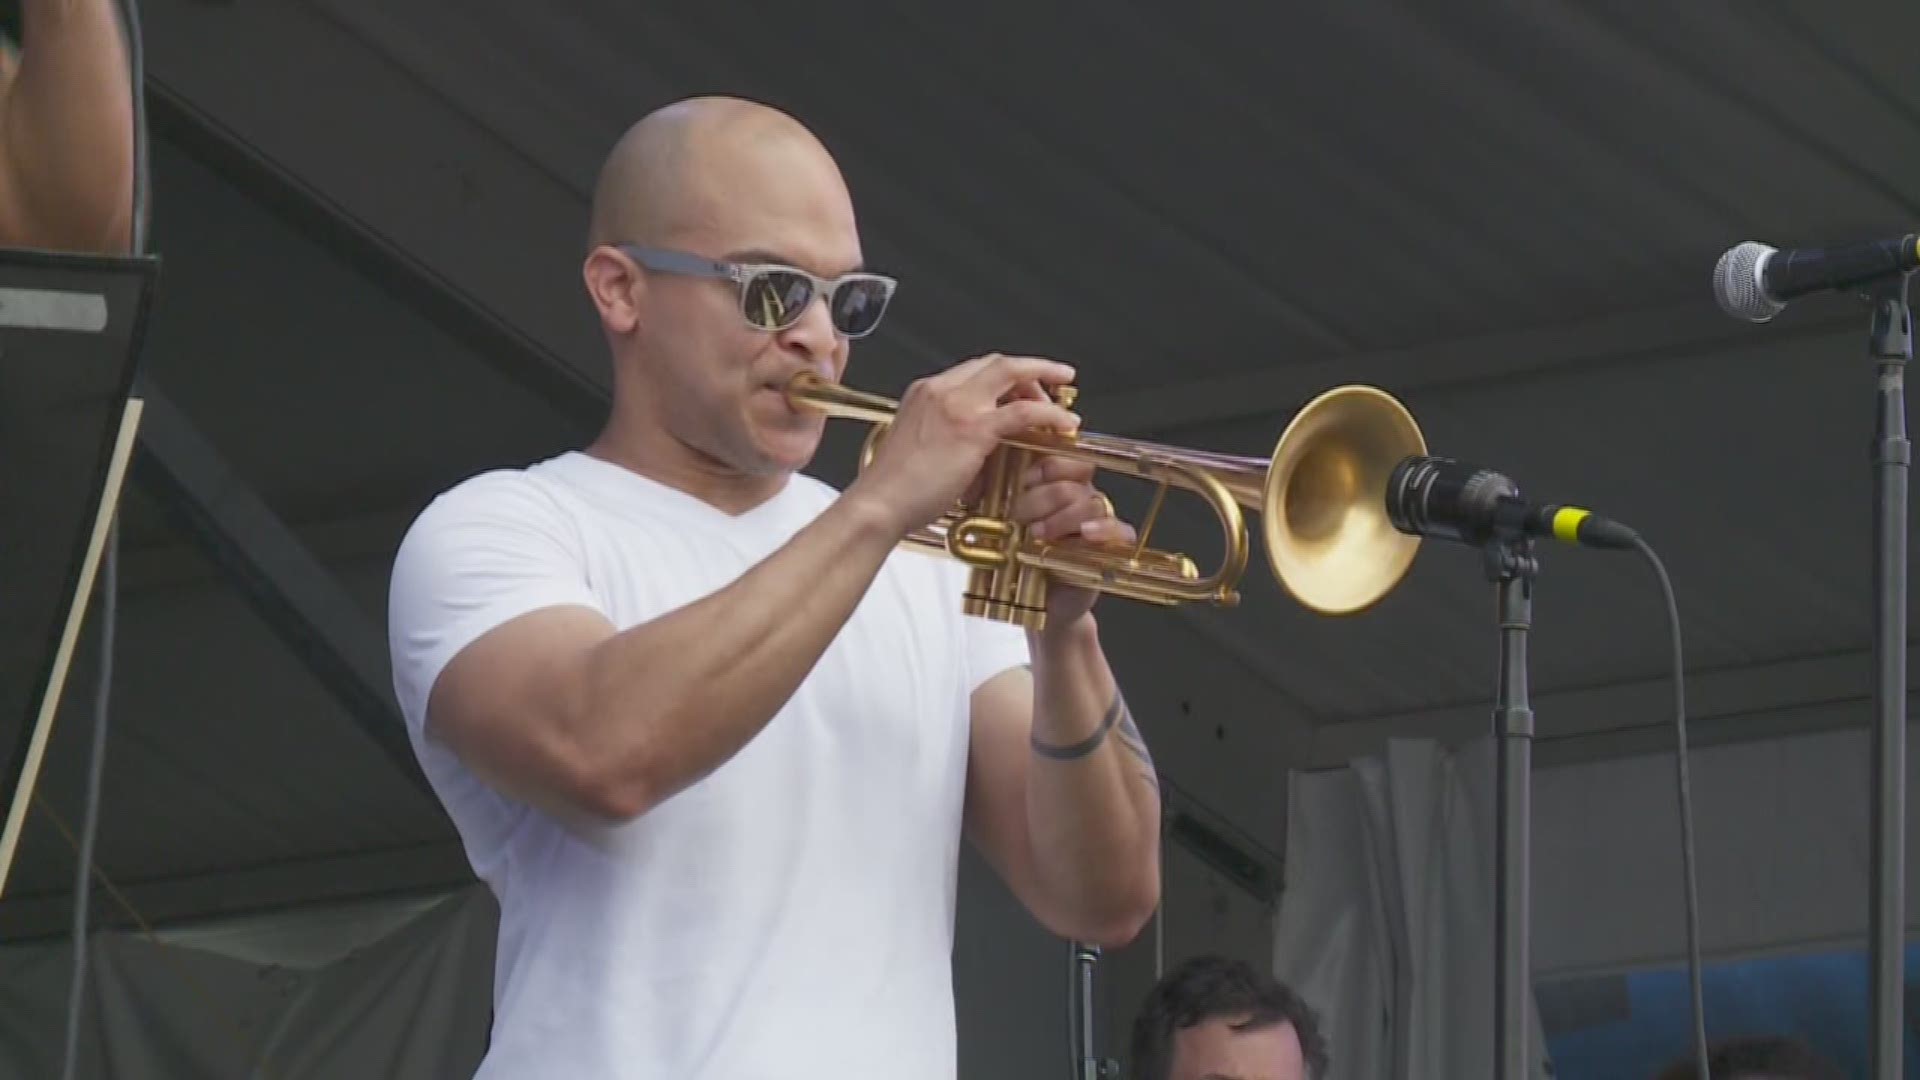 David Hammer talks about the resignation of Irvin Mayfield from the New Orleans Jazz Orchestra.